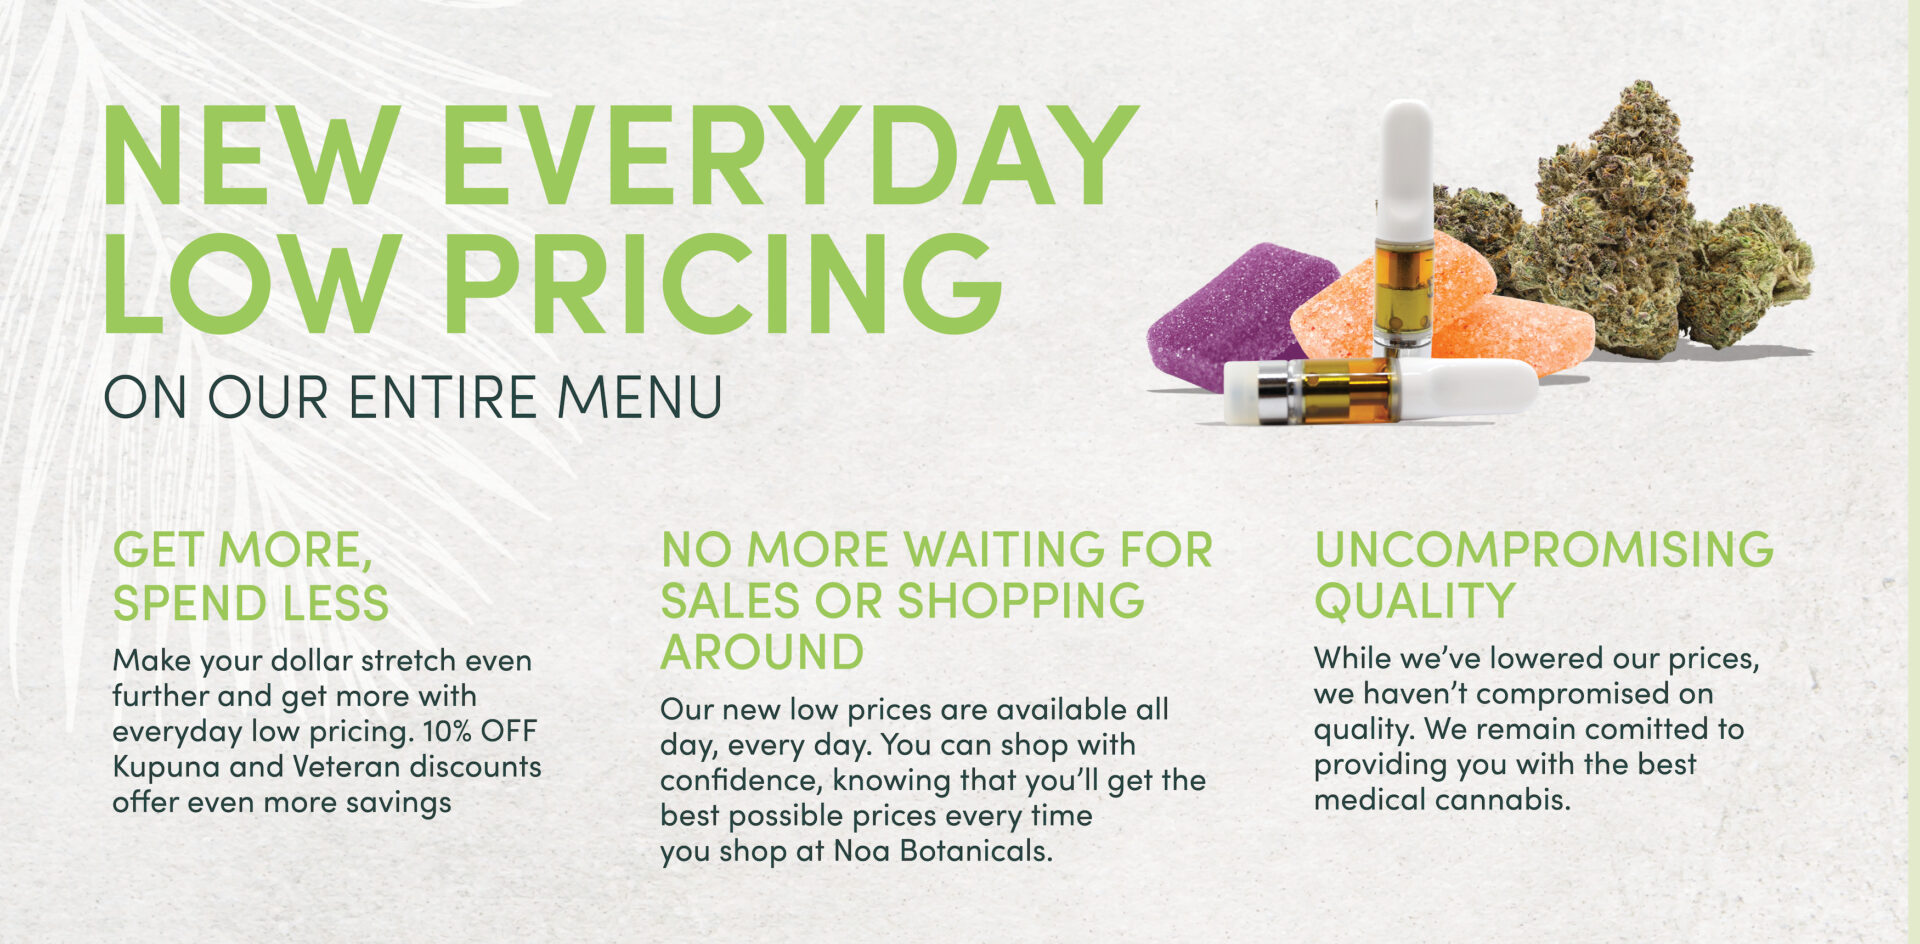 New everyday low pricing on our entire cannabis menu.